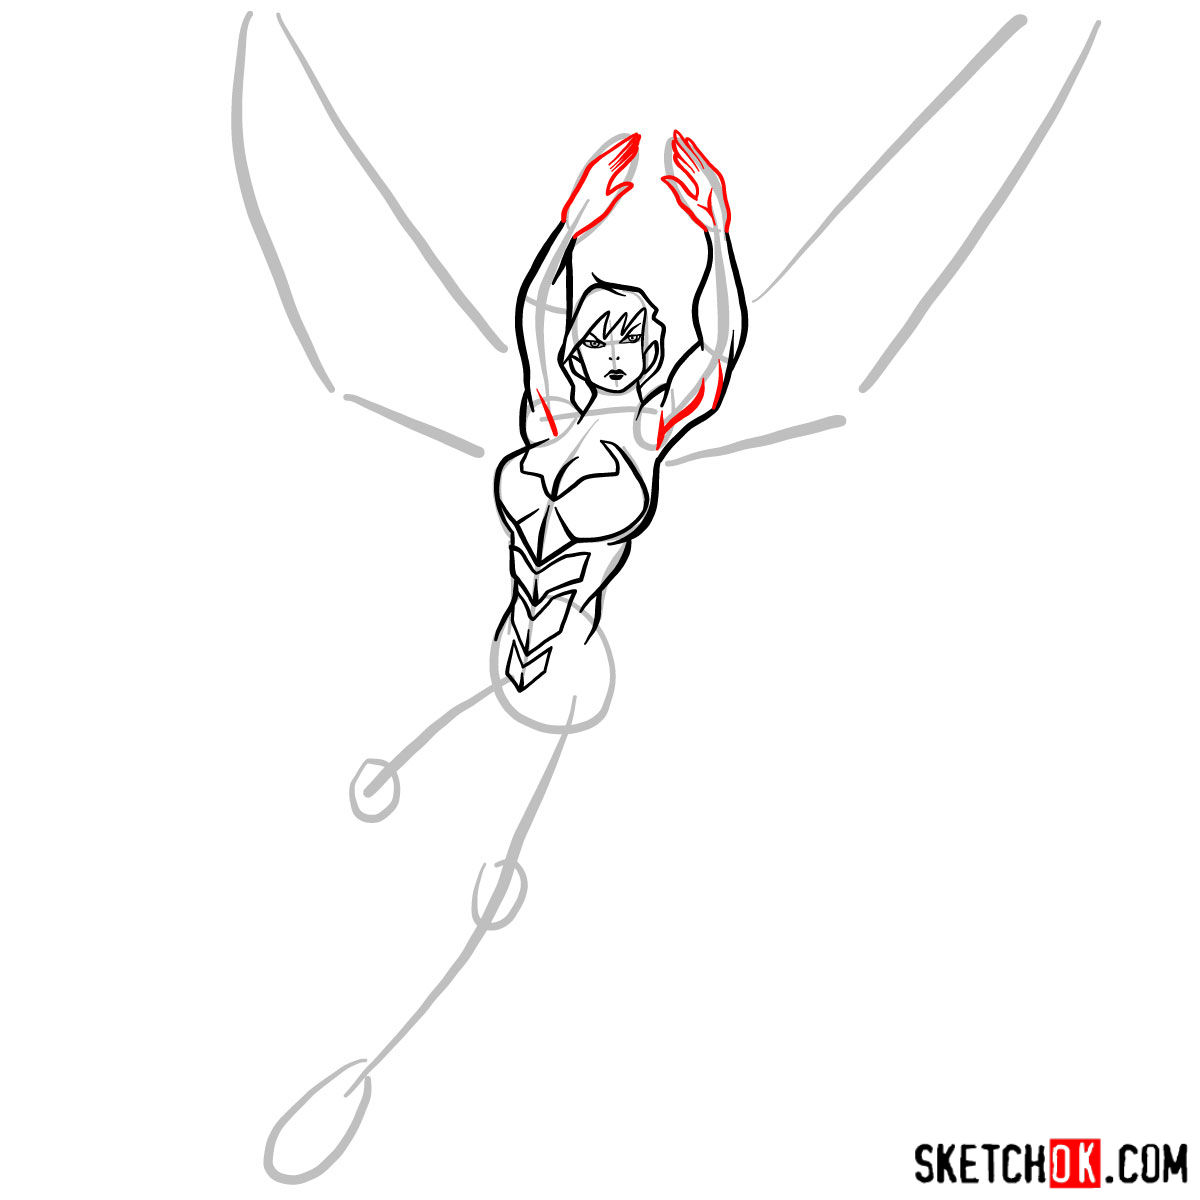 How to draw Wasp, Janet van Dyne from Marvel Comics - step 08